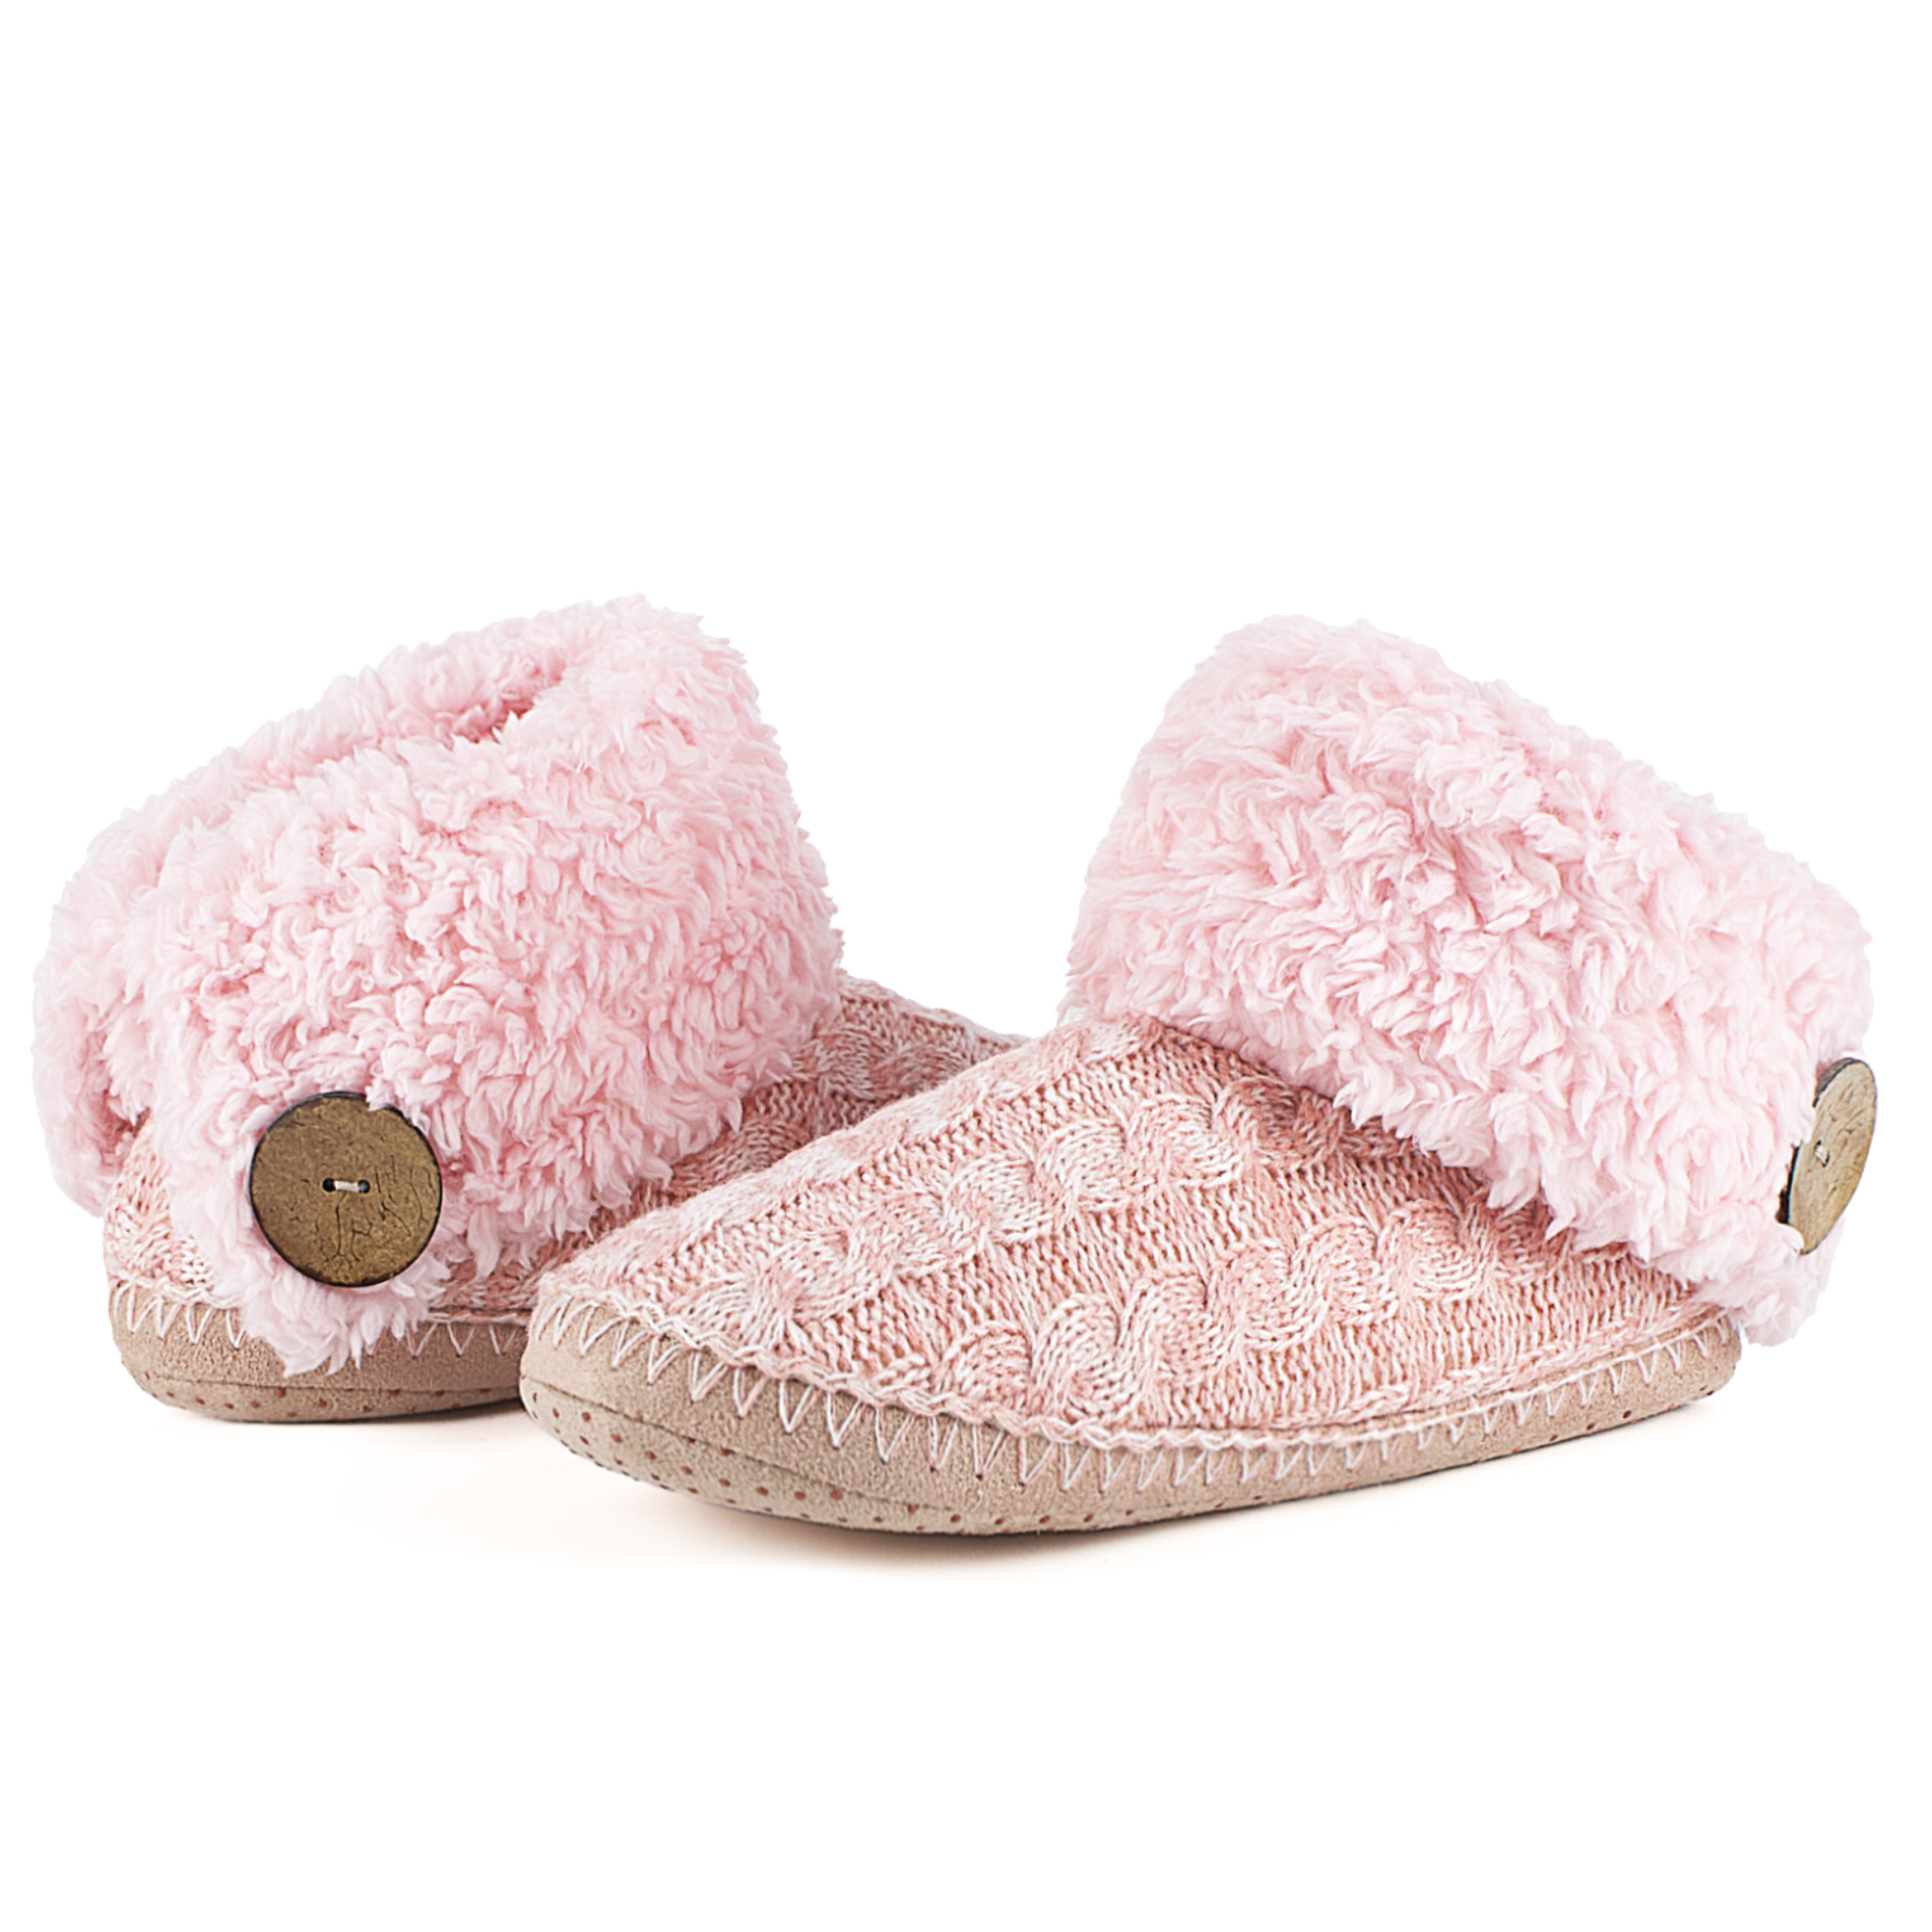 cosyone1997 Women's Cable Knit Cute Bootie Slippers, Winter Indoor Soft ...